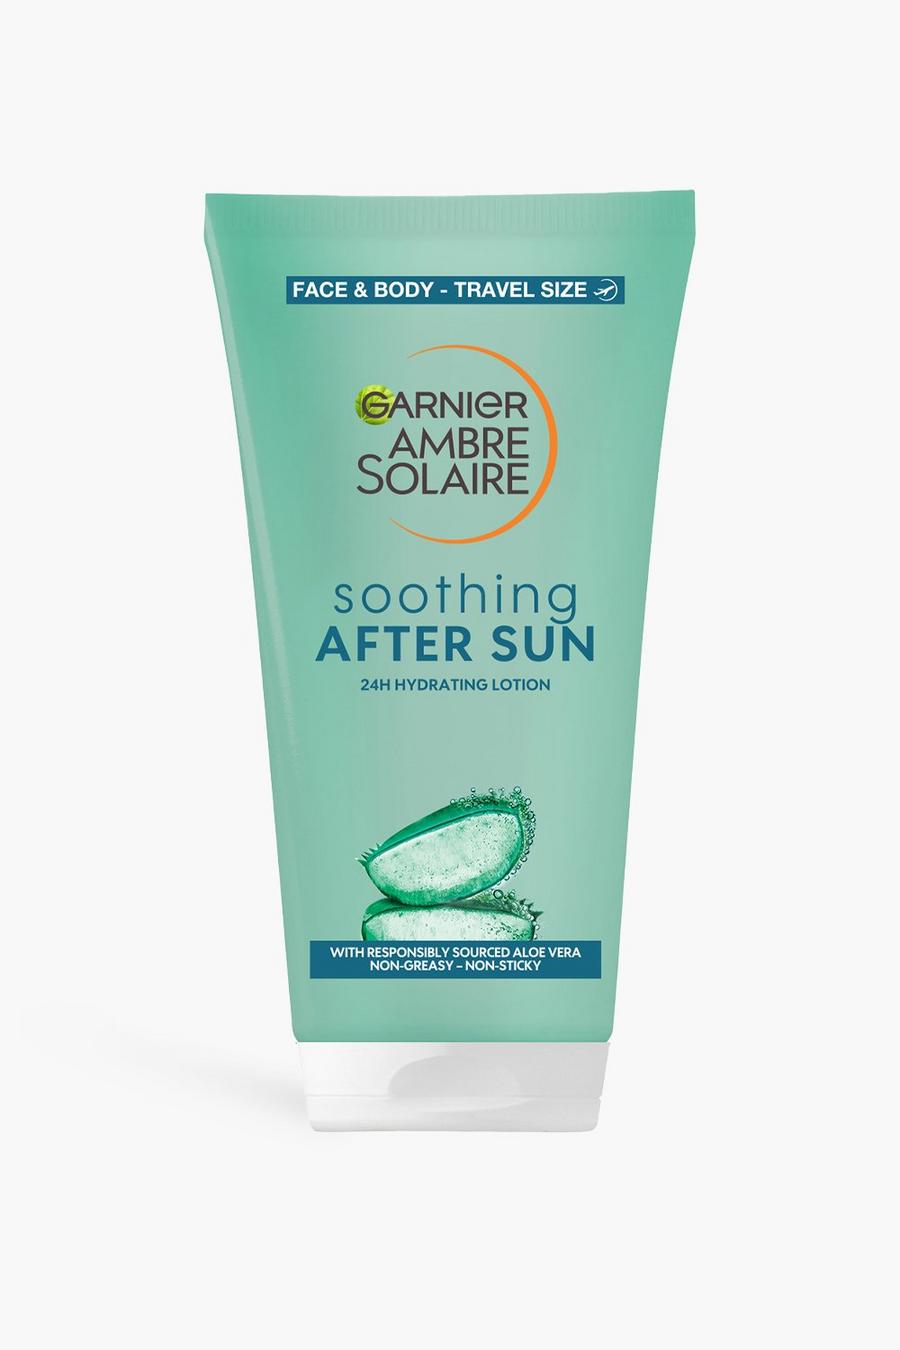 White blanc Garnier Ambre Solaire Hydrating Soothing After Sun Lotion Travel size 100ml (SAVE 17%)